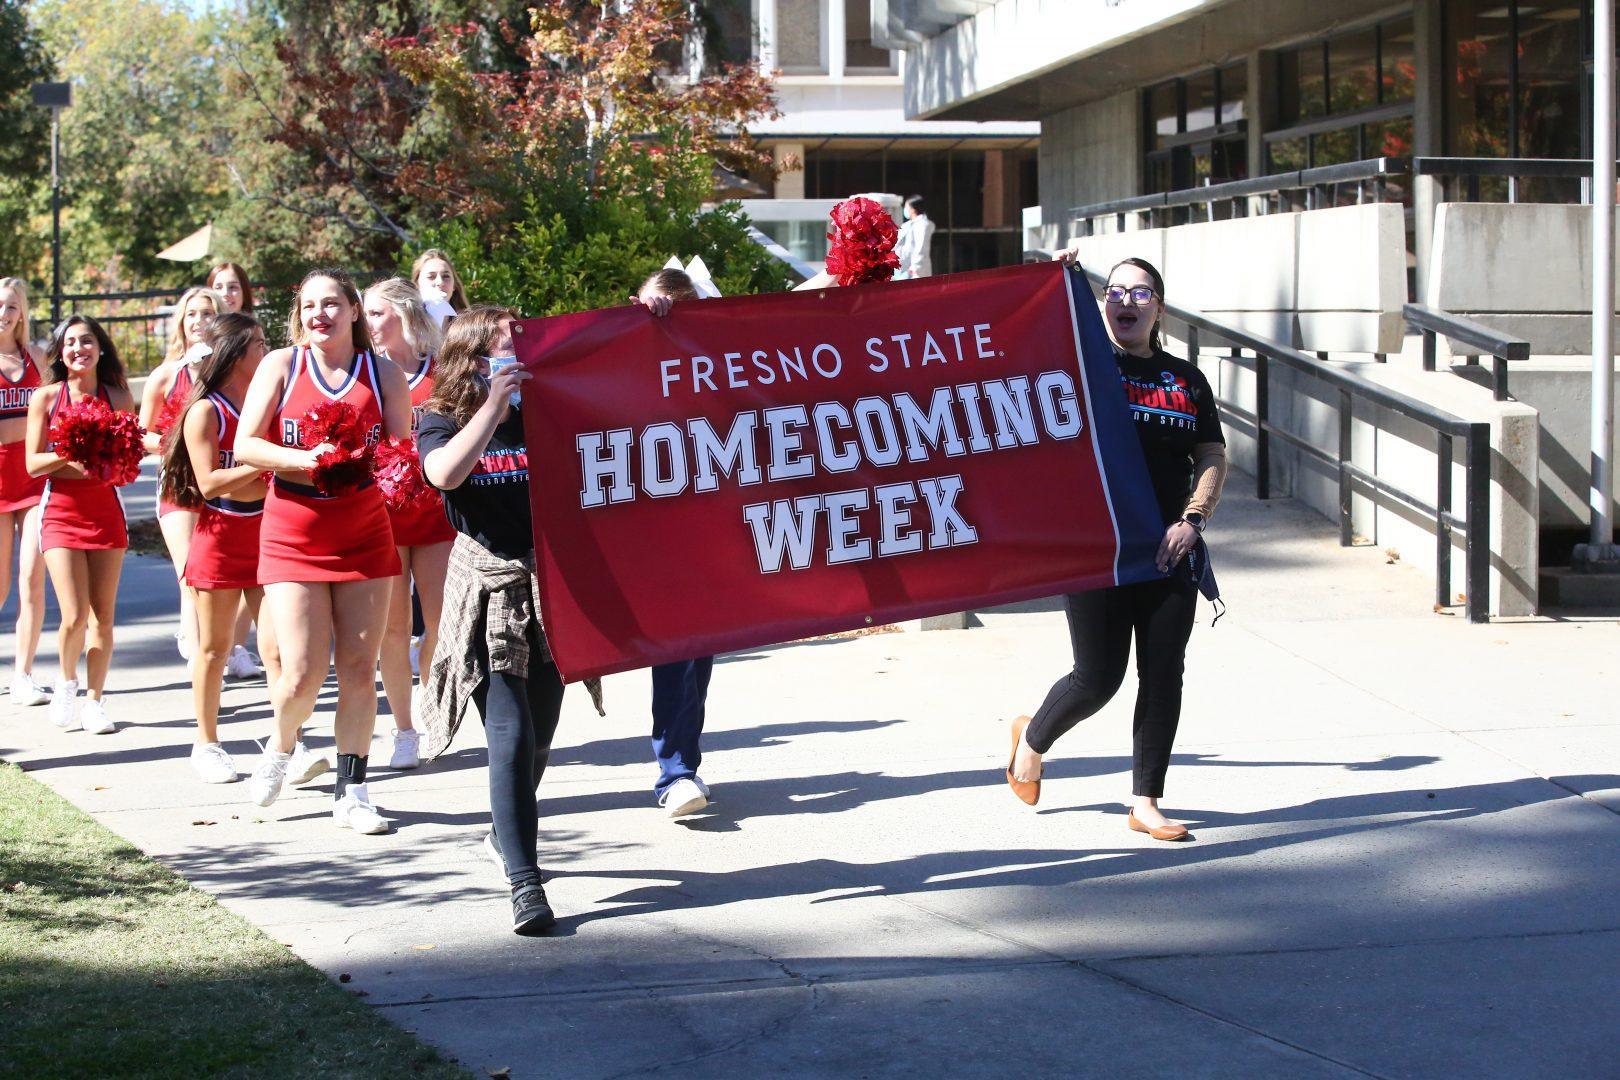 The Homecoming Pawrade greeted the university with music and activities on Oct. 18. (JesÃºs Cano/The Collegian)